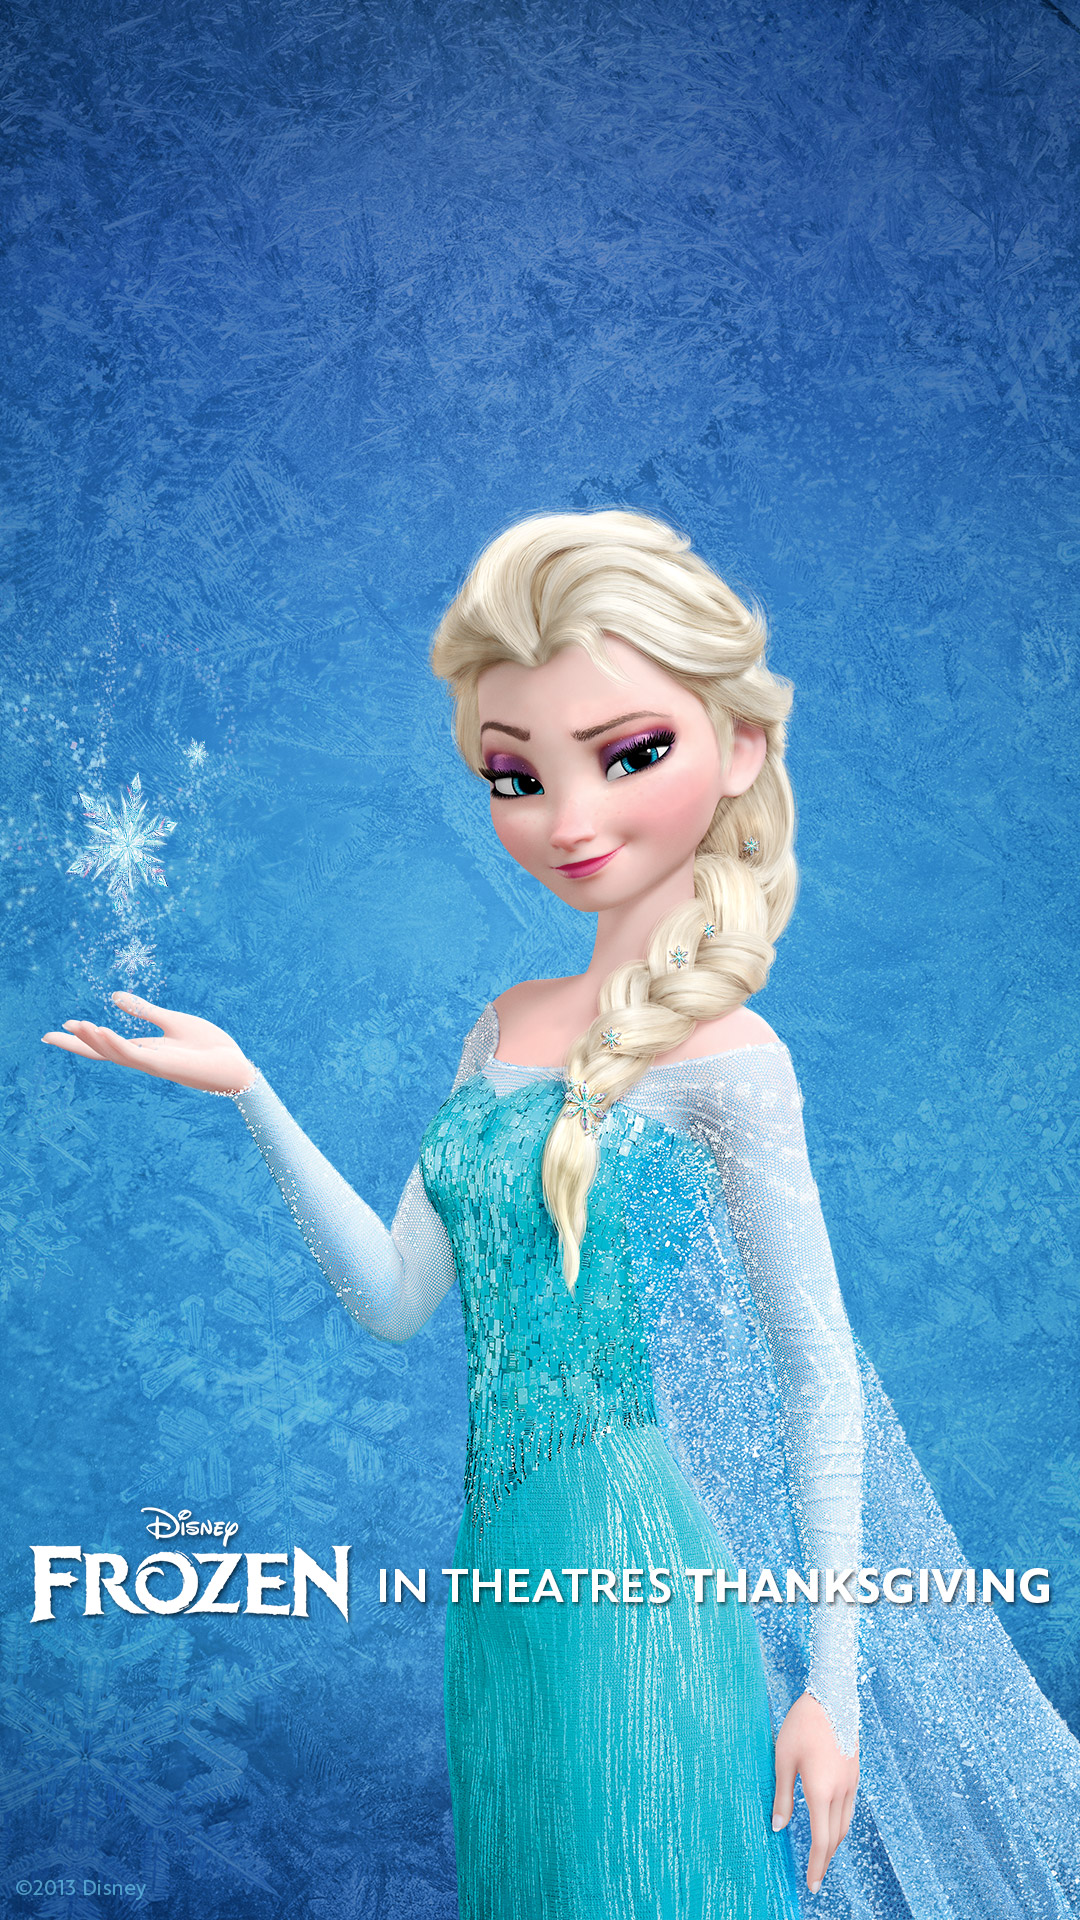 hd disney frozen wallpapers for mobile phone 1080x1920 1080x1920